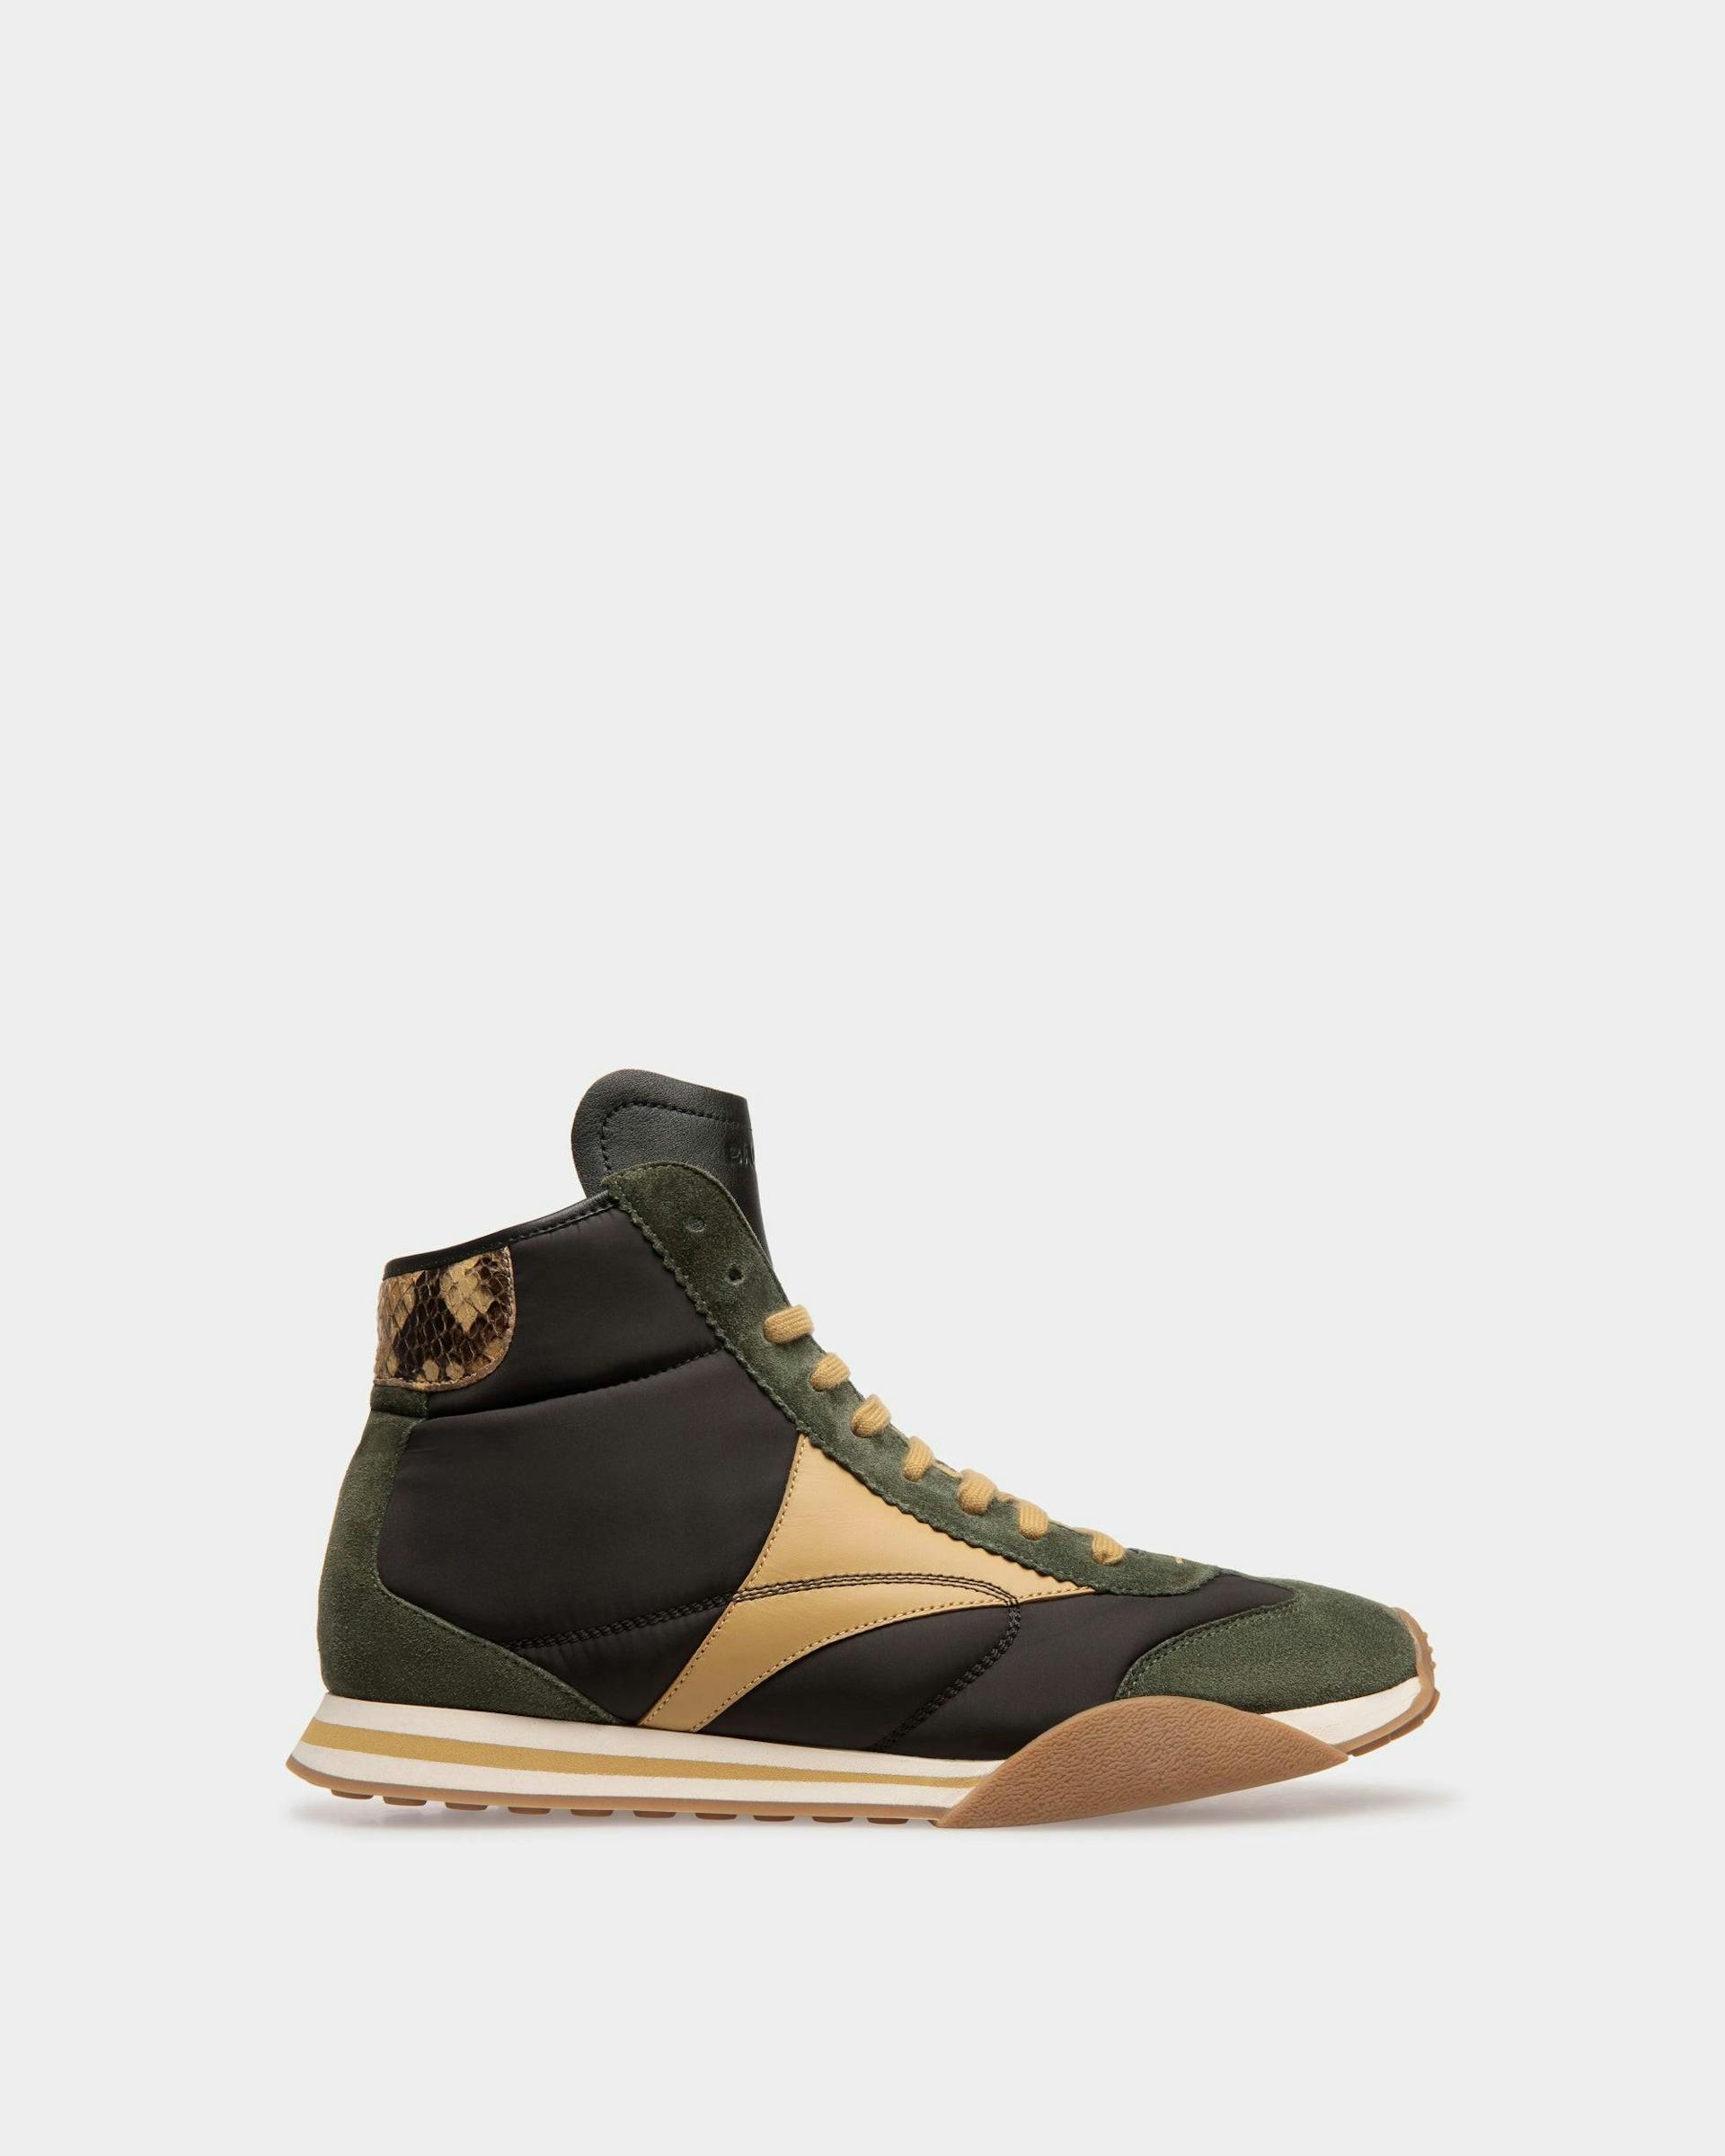 Sussex Sneakers In Green And Black Leather And Fabric - Men's - Bally - 01